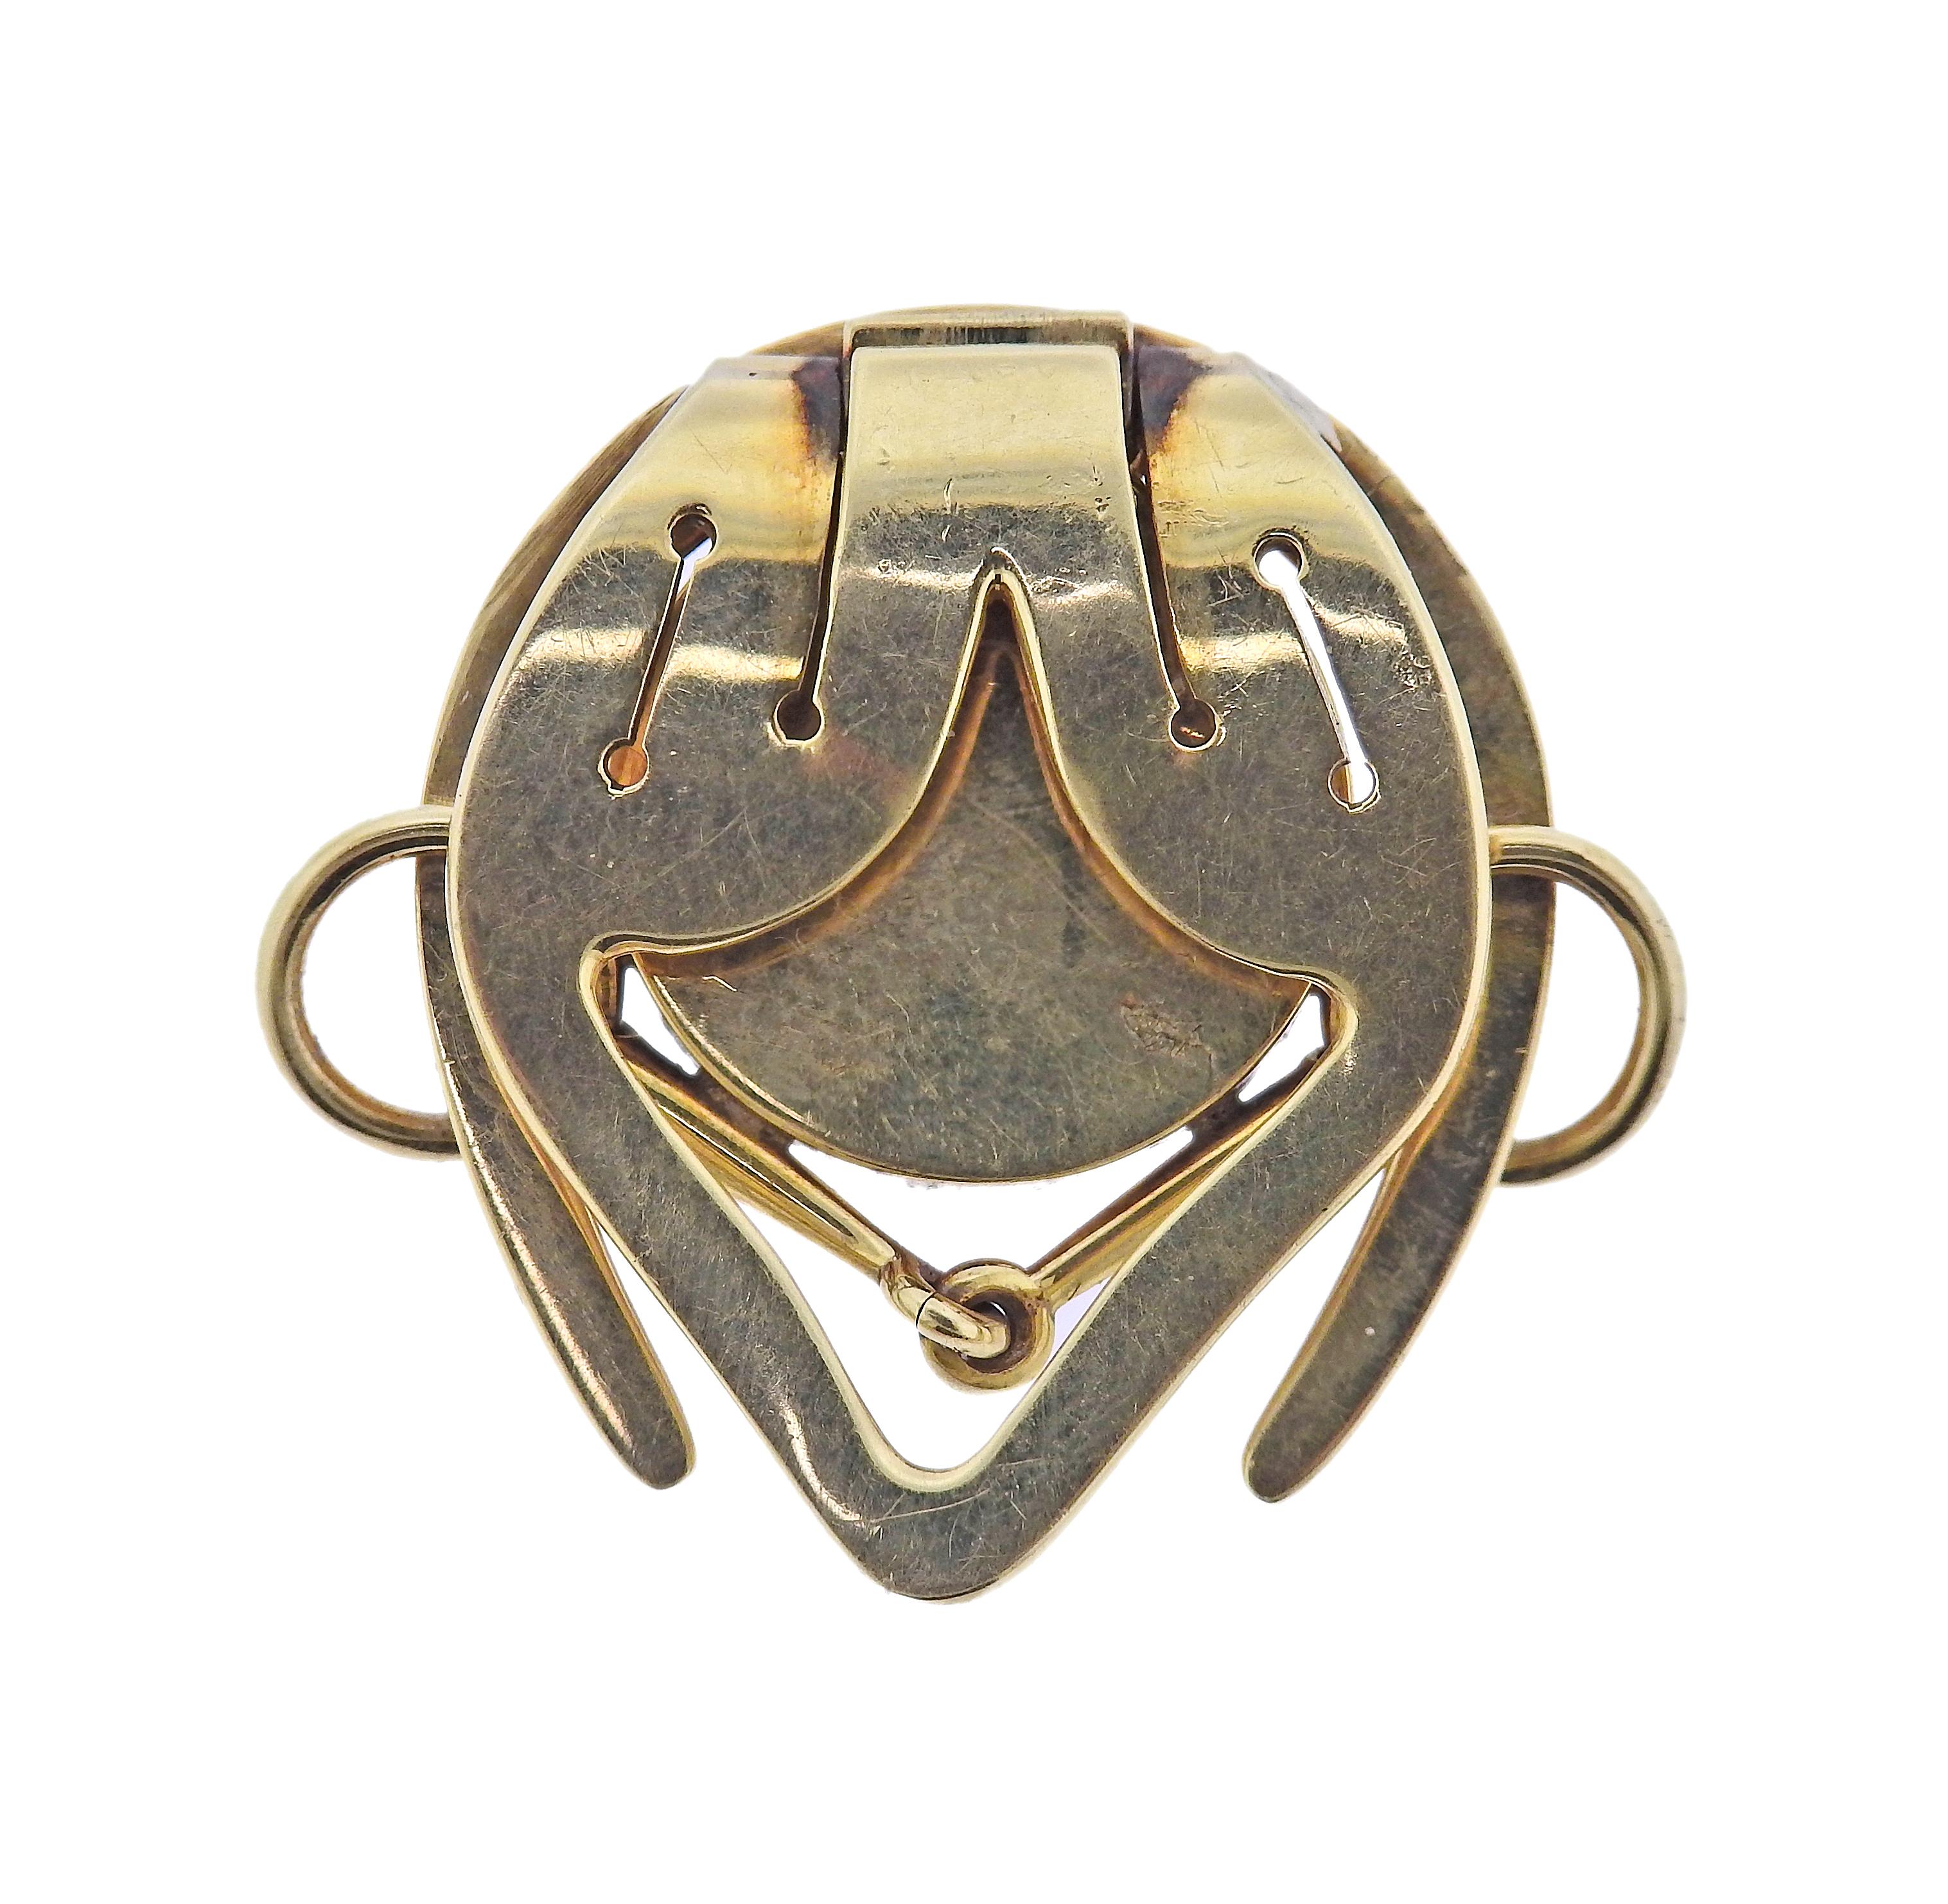 Vintage, circa 1940s Cartier 14k gold clip, with reverse painting under crystal, depicting horse head. Clip measures 1